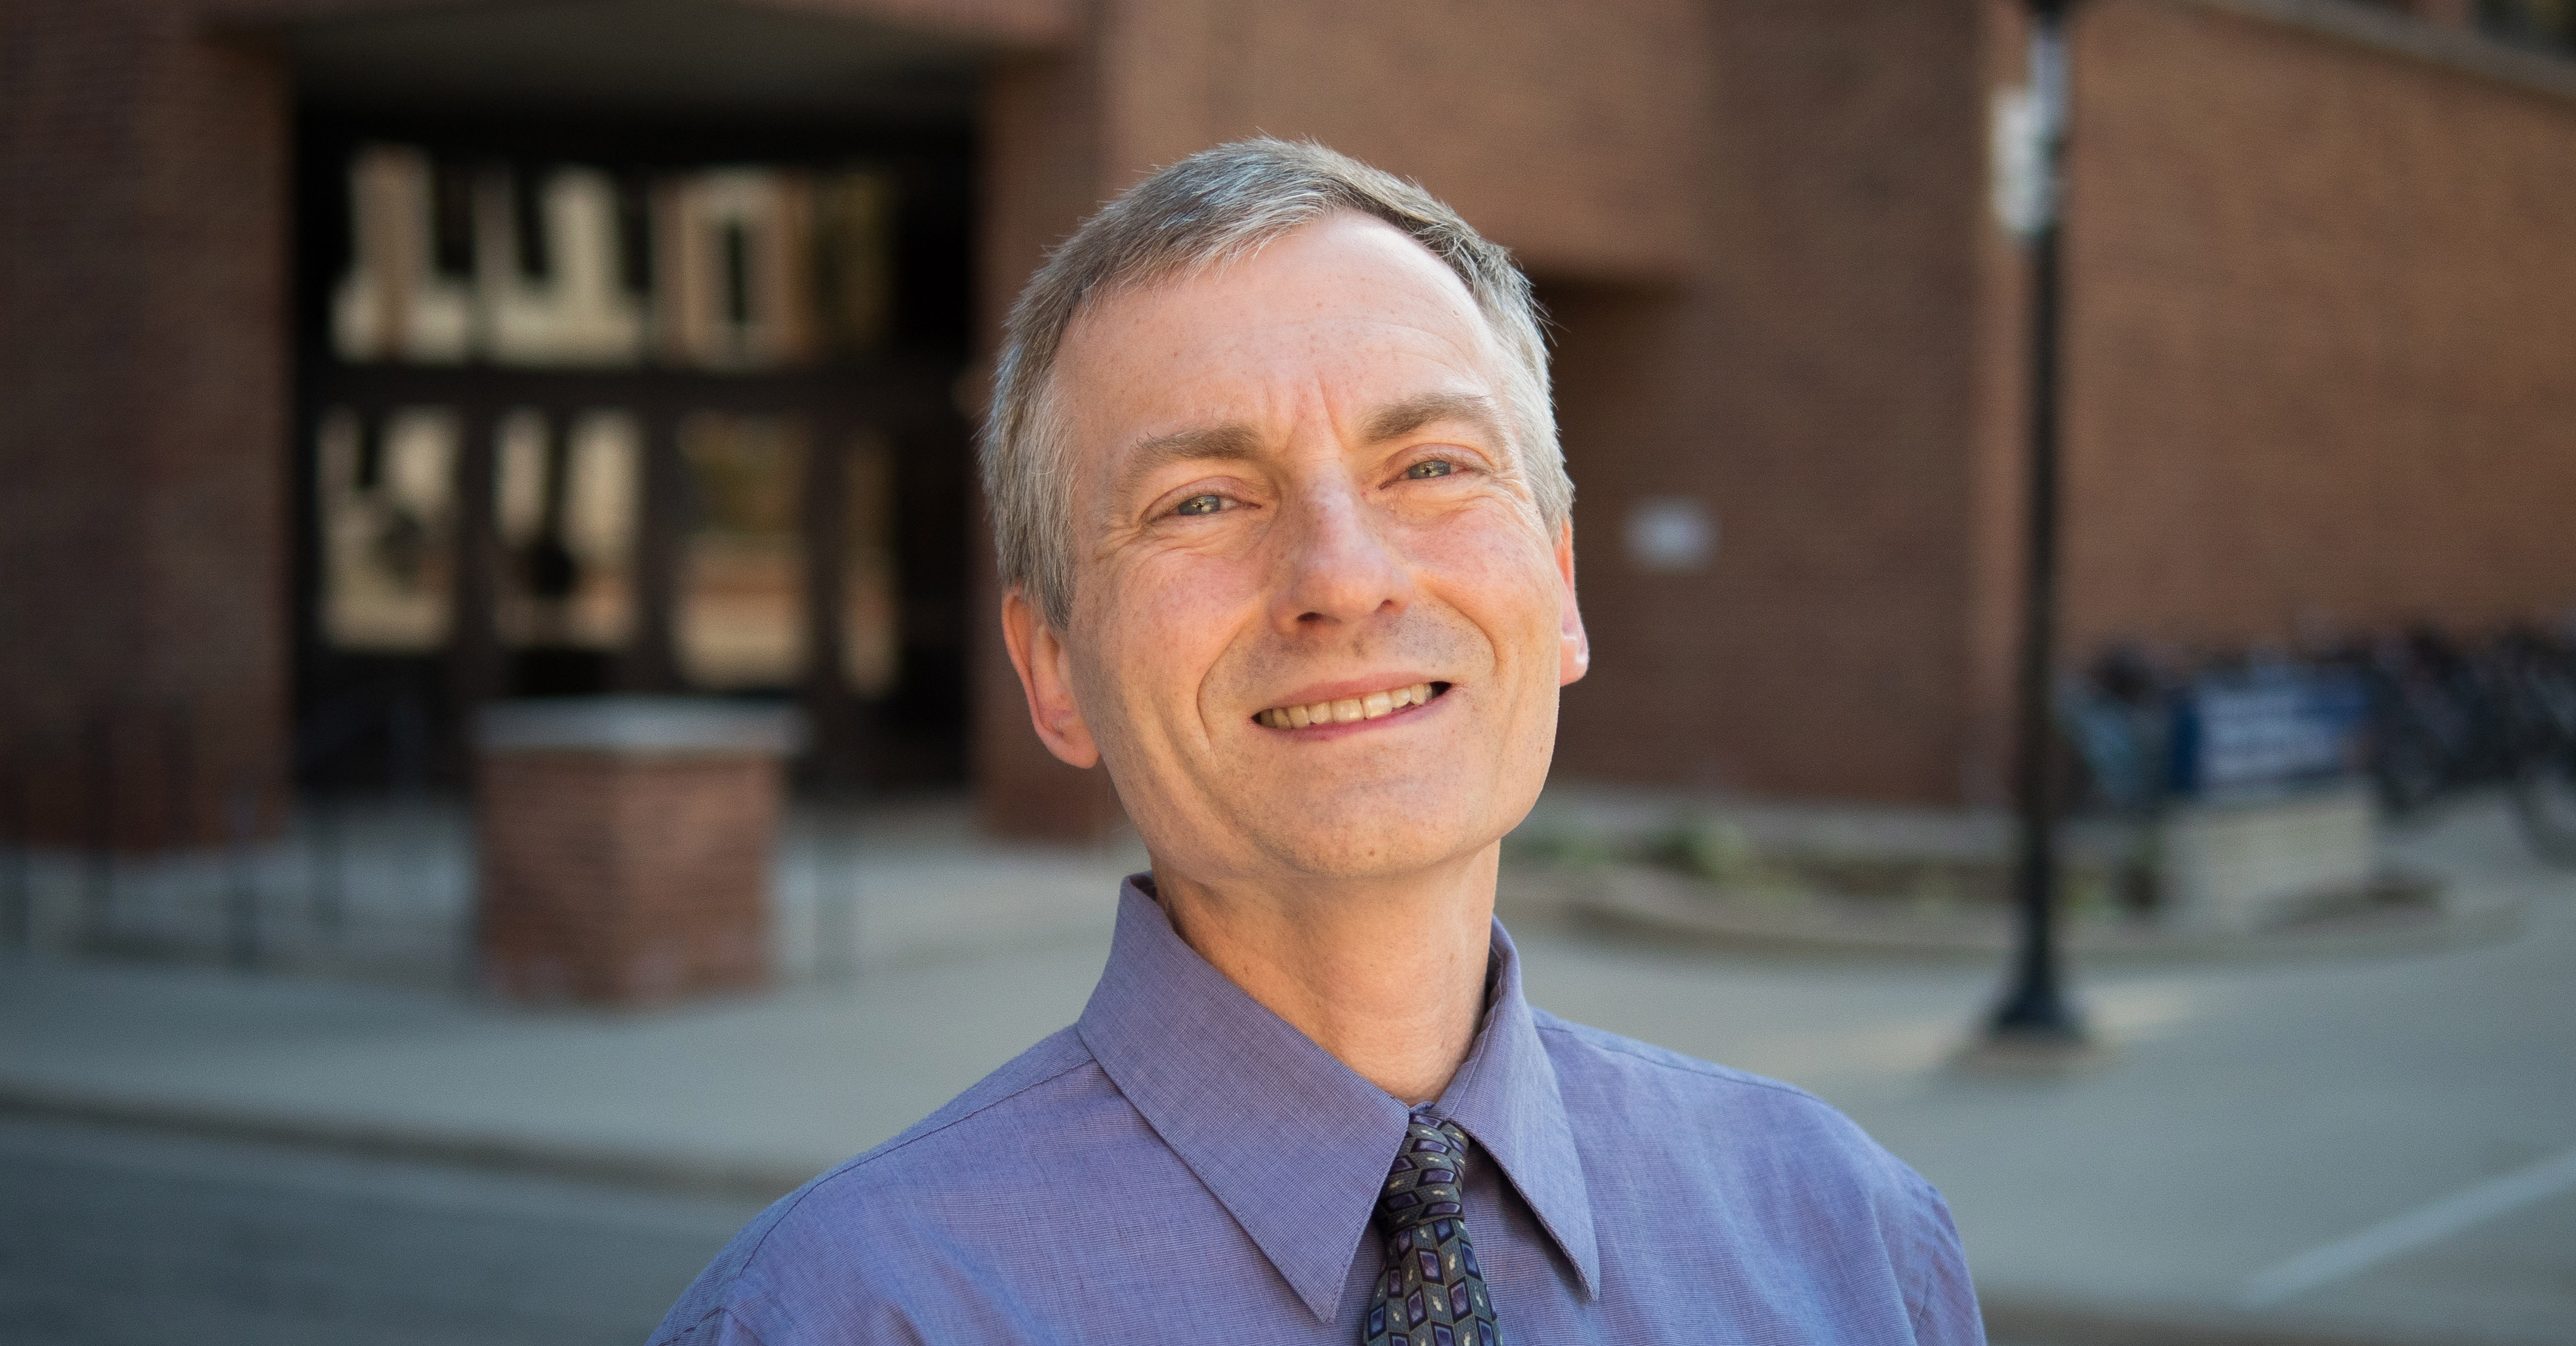 Richard Hirth Named S.J. Axelrod Collegiate Professor of Health Management and Policy